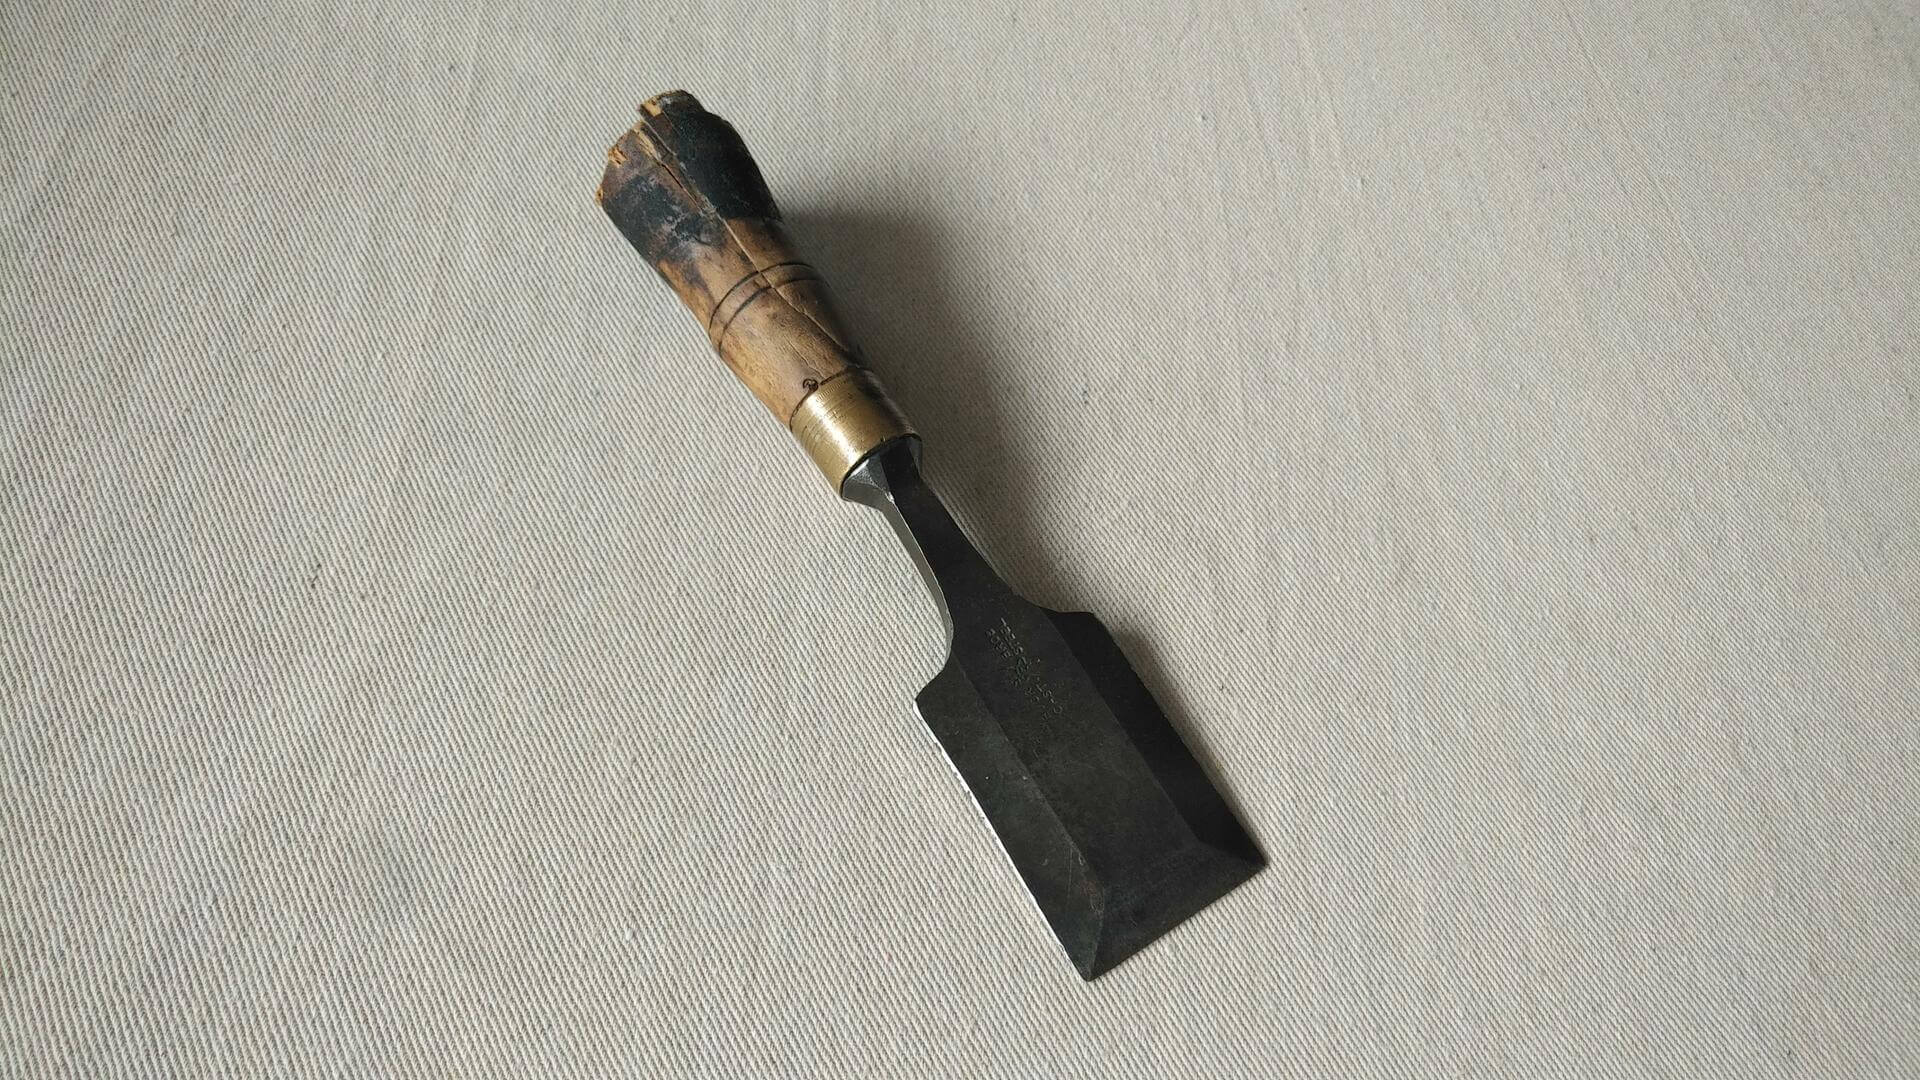 Vintage Buck Bros 1 1/2" beveled edge cast steel tang woodworking chisel brass ferrule Antique made in USA collectible carpentry & cabinet maker edge tools